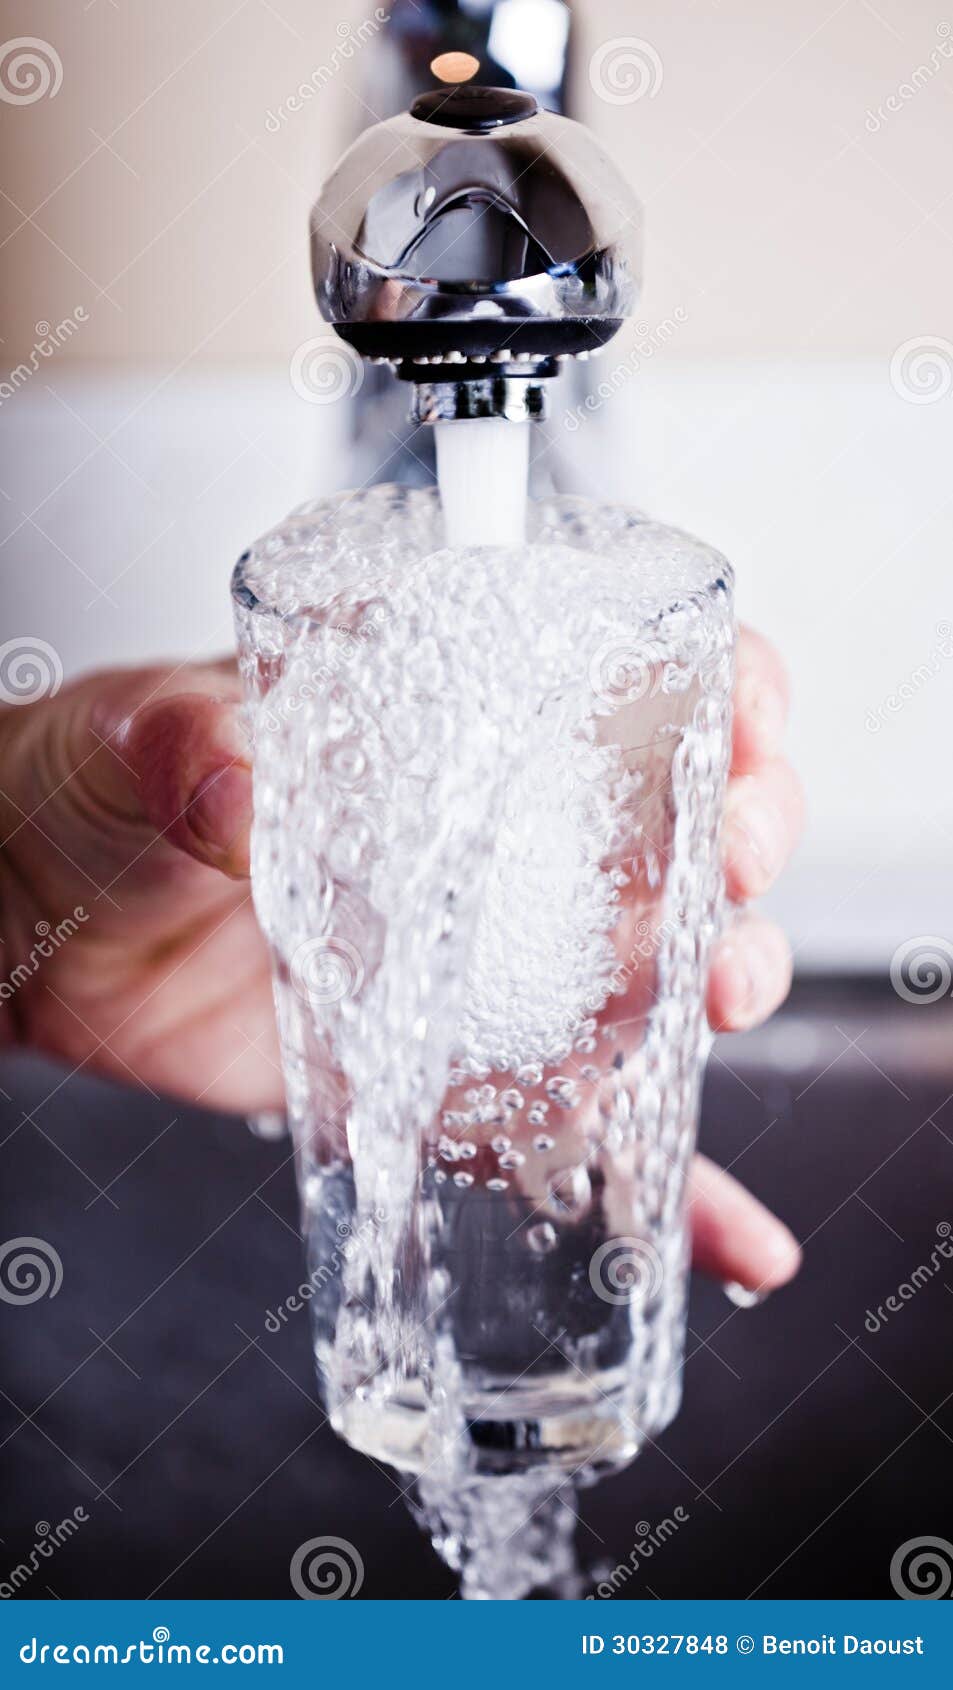 very thirsty man filling an overflowing glass of water